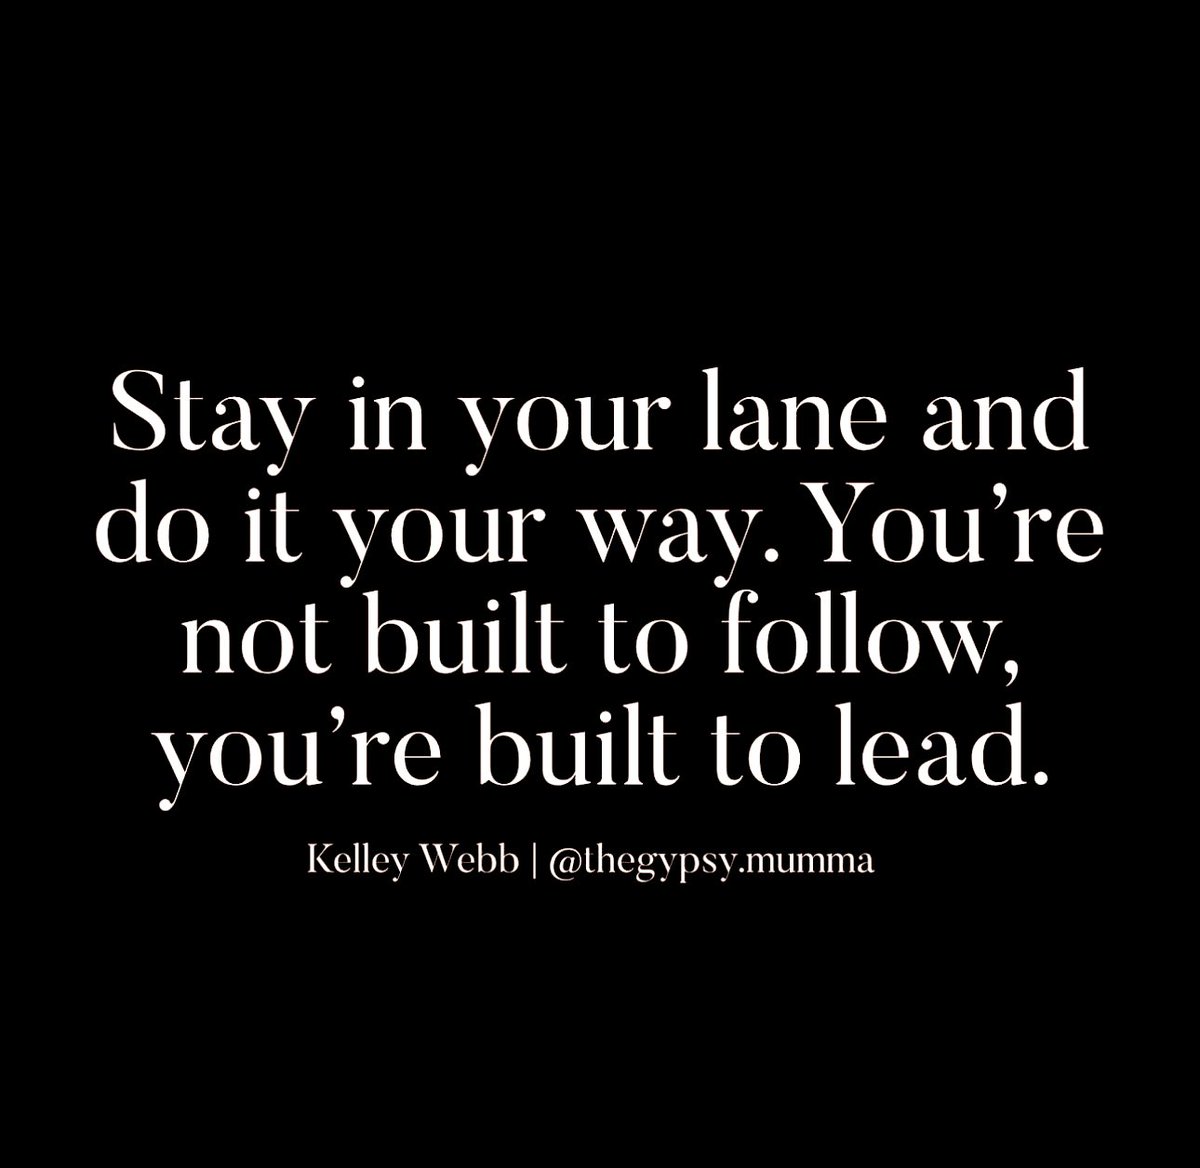 Happy Tuesday and your daily dose of inspiration!💕

You were born to lead!
Do your thing and never deviate!💕

Grateful for the opportunity to live, love, and lead.💕

#ALLmeansALL #GreenfieldGuarantee #ProudtobeGUSD
#CultivateCuriosity
#TrustAndInspire
#TrustAndGrow…